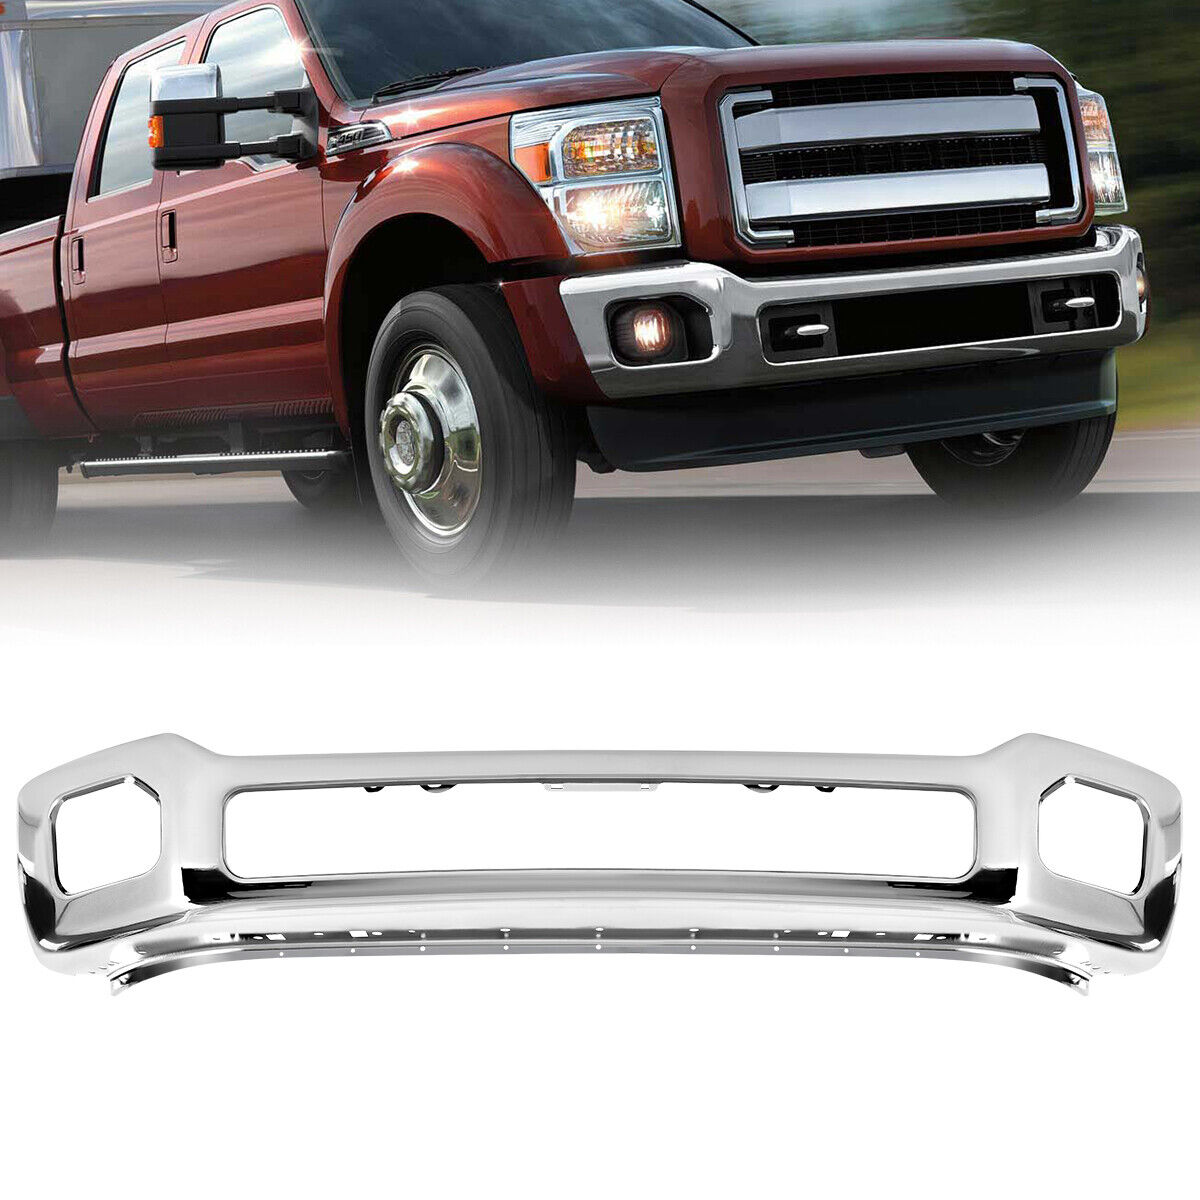 Chrome Steel Front Bumper Face Bar for 2011-2016 Ford F-250 F-350 Super Duty